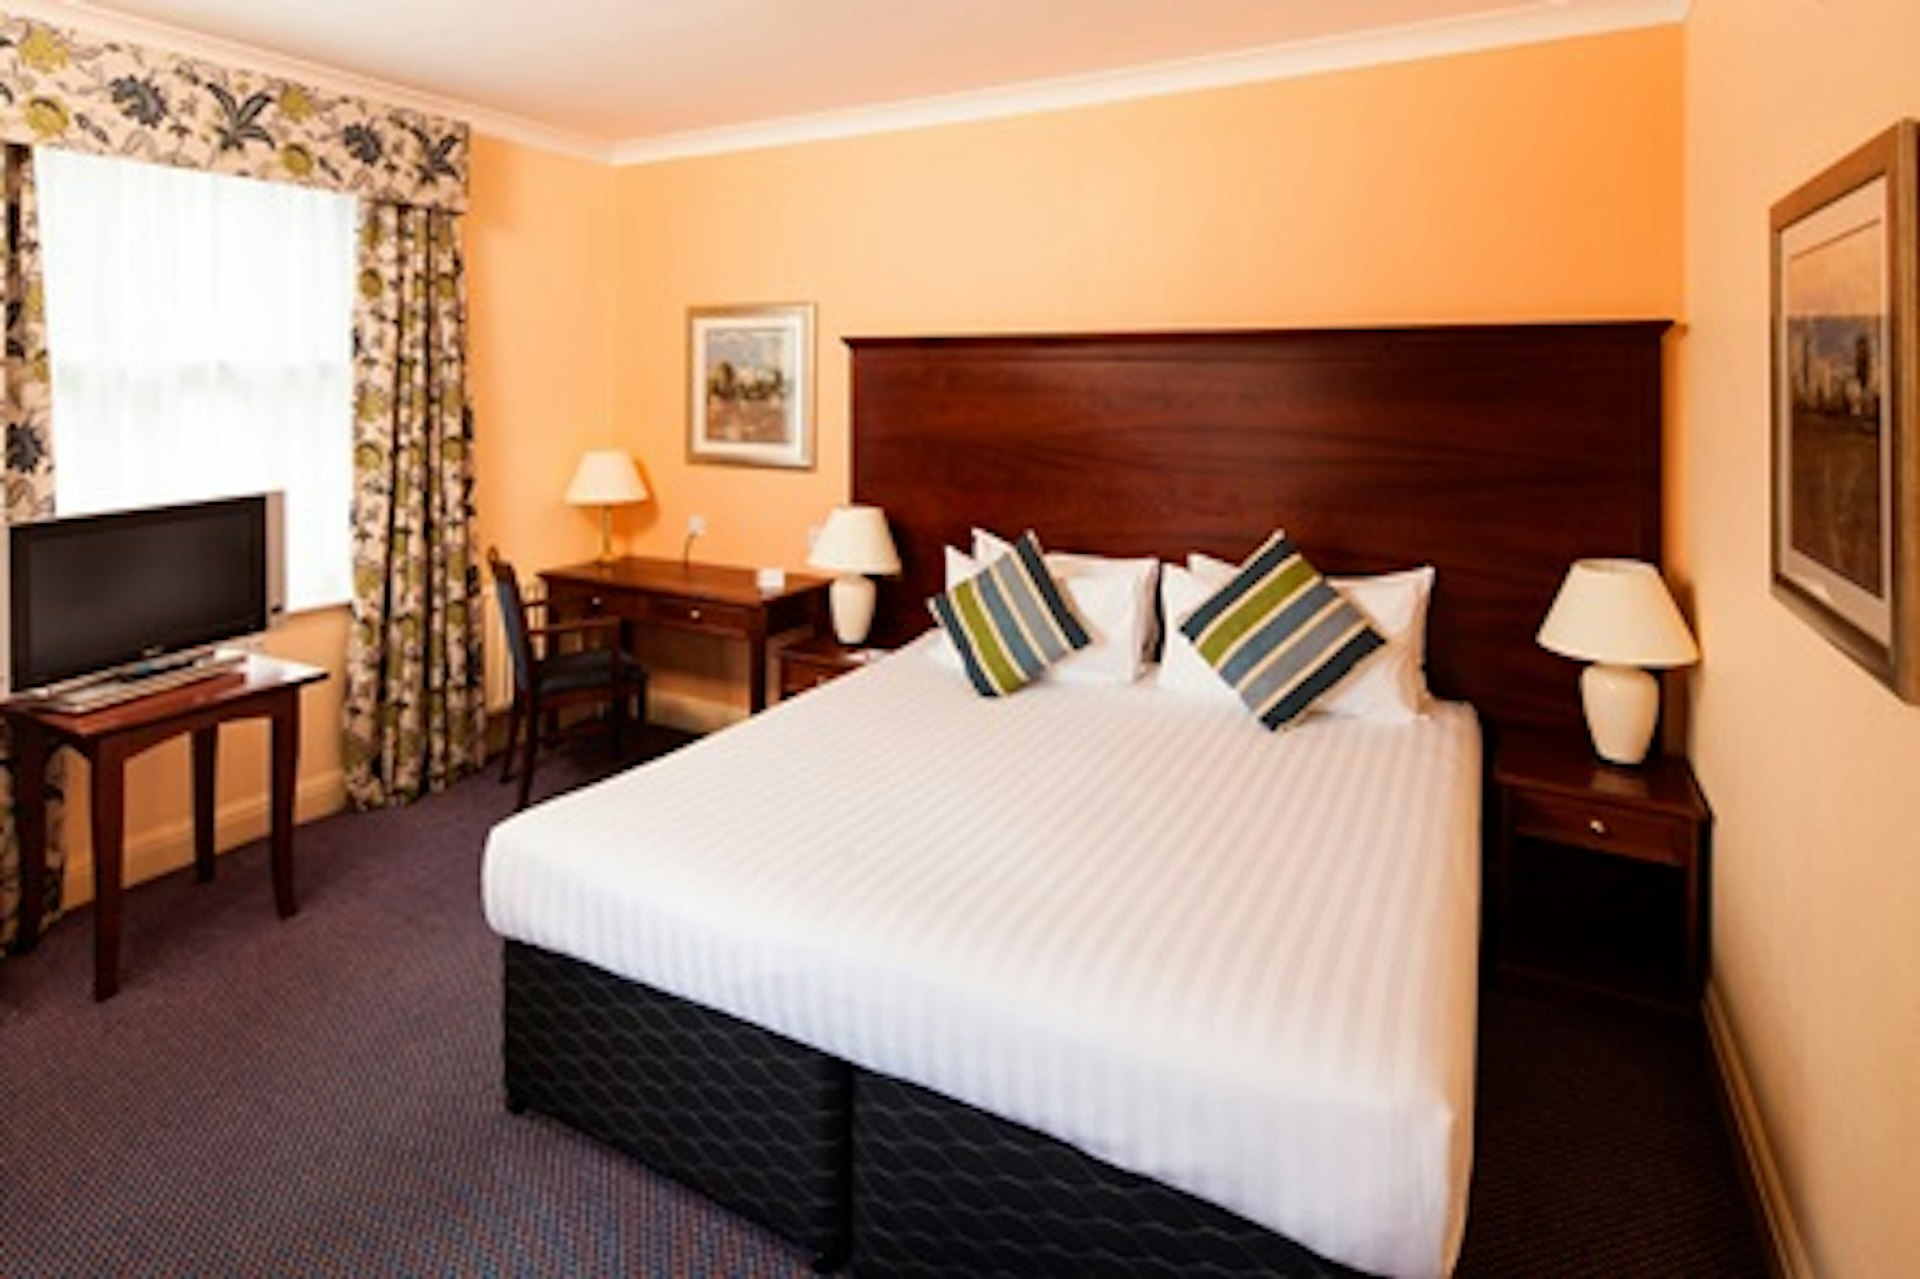 One Night Break for Two at the Mercure Newbury Elcot Park Hotel 2